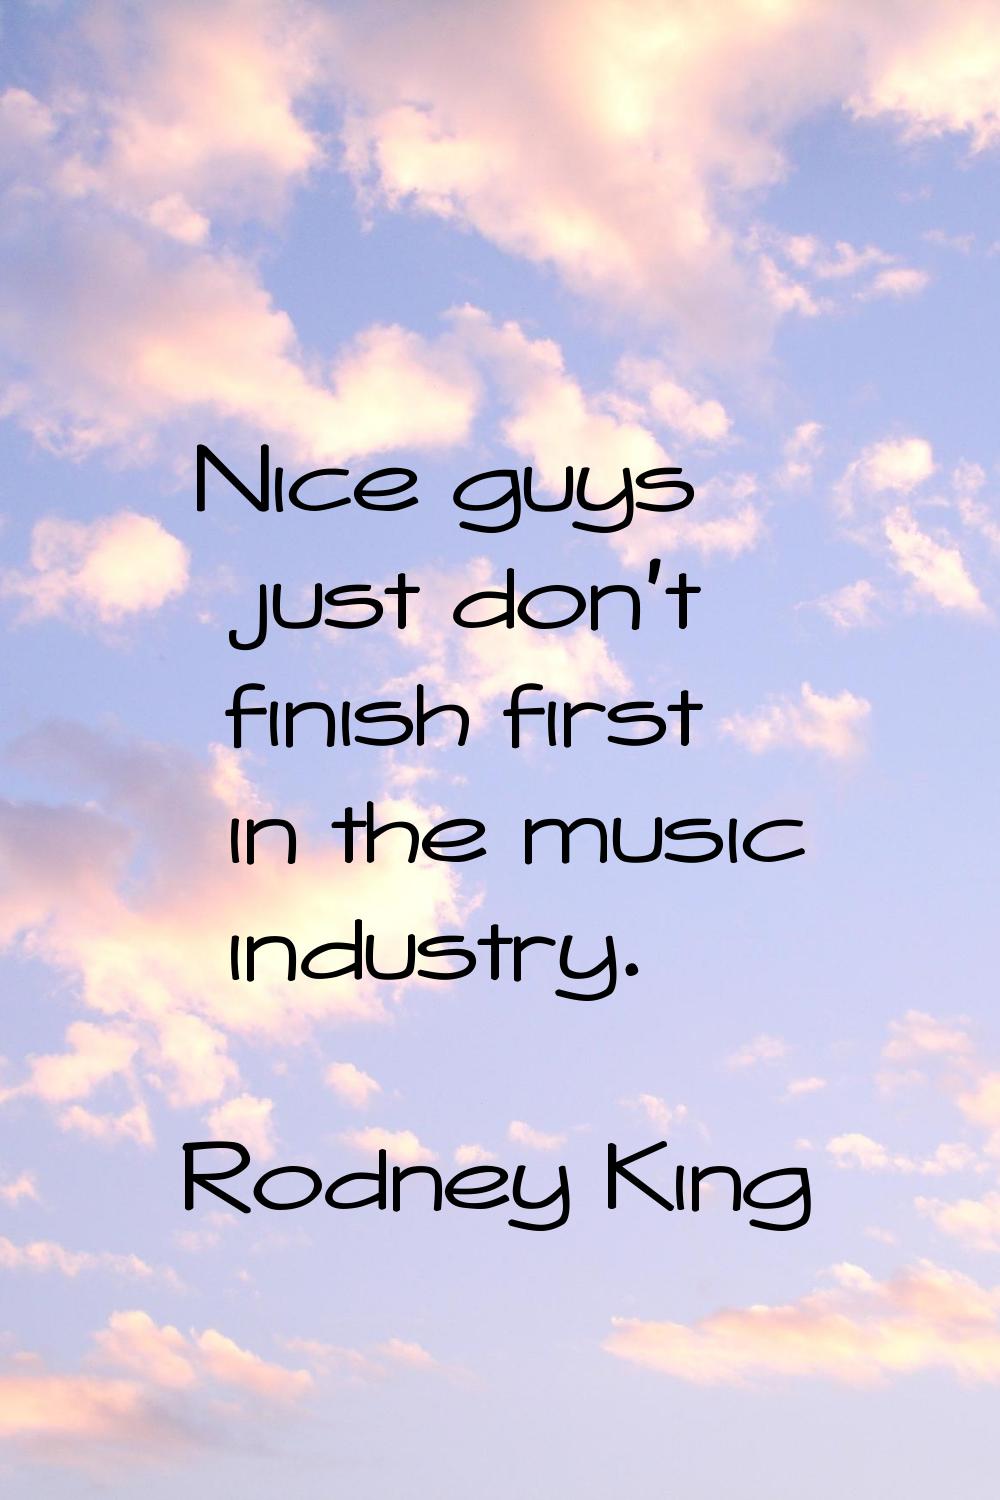 Nice guys just don't finish first in the music industry.